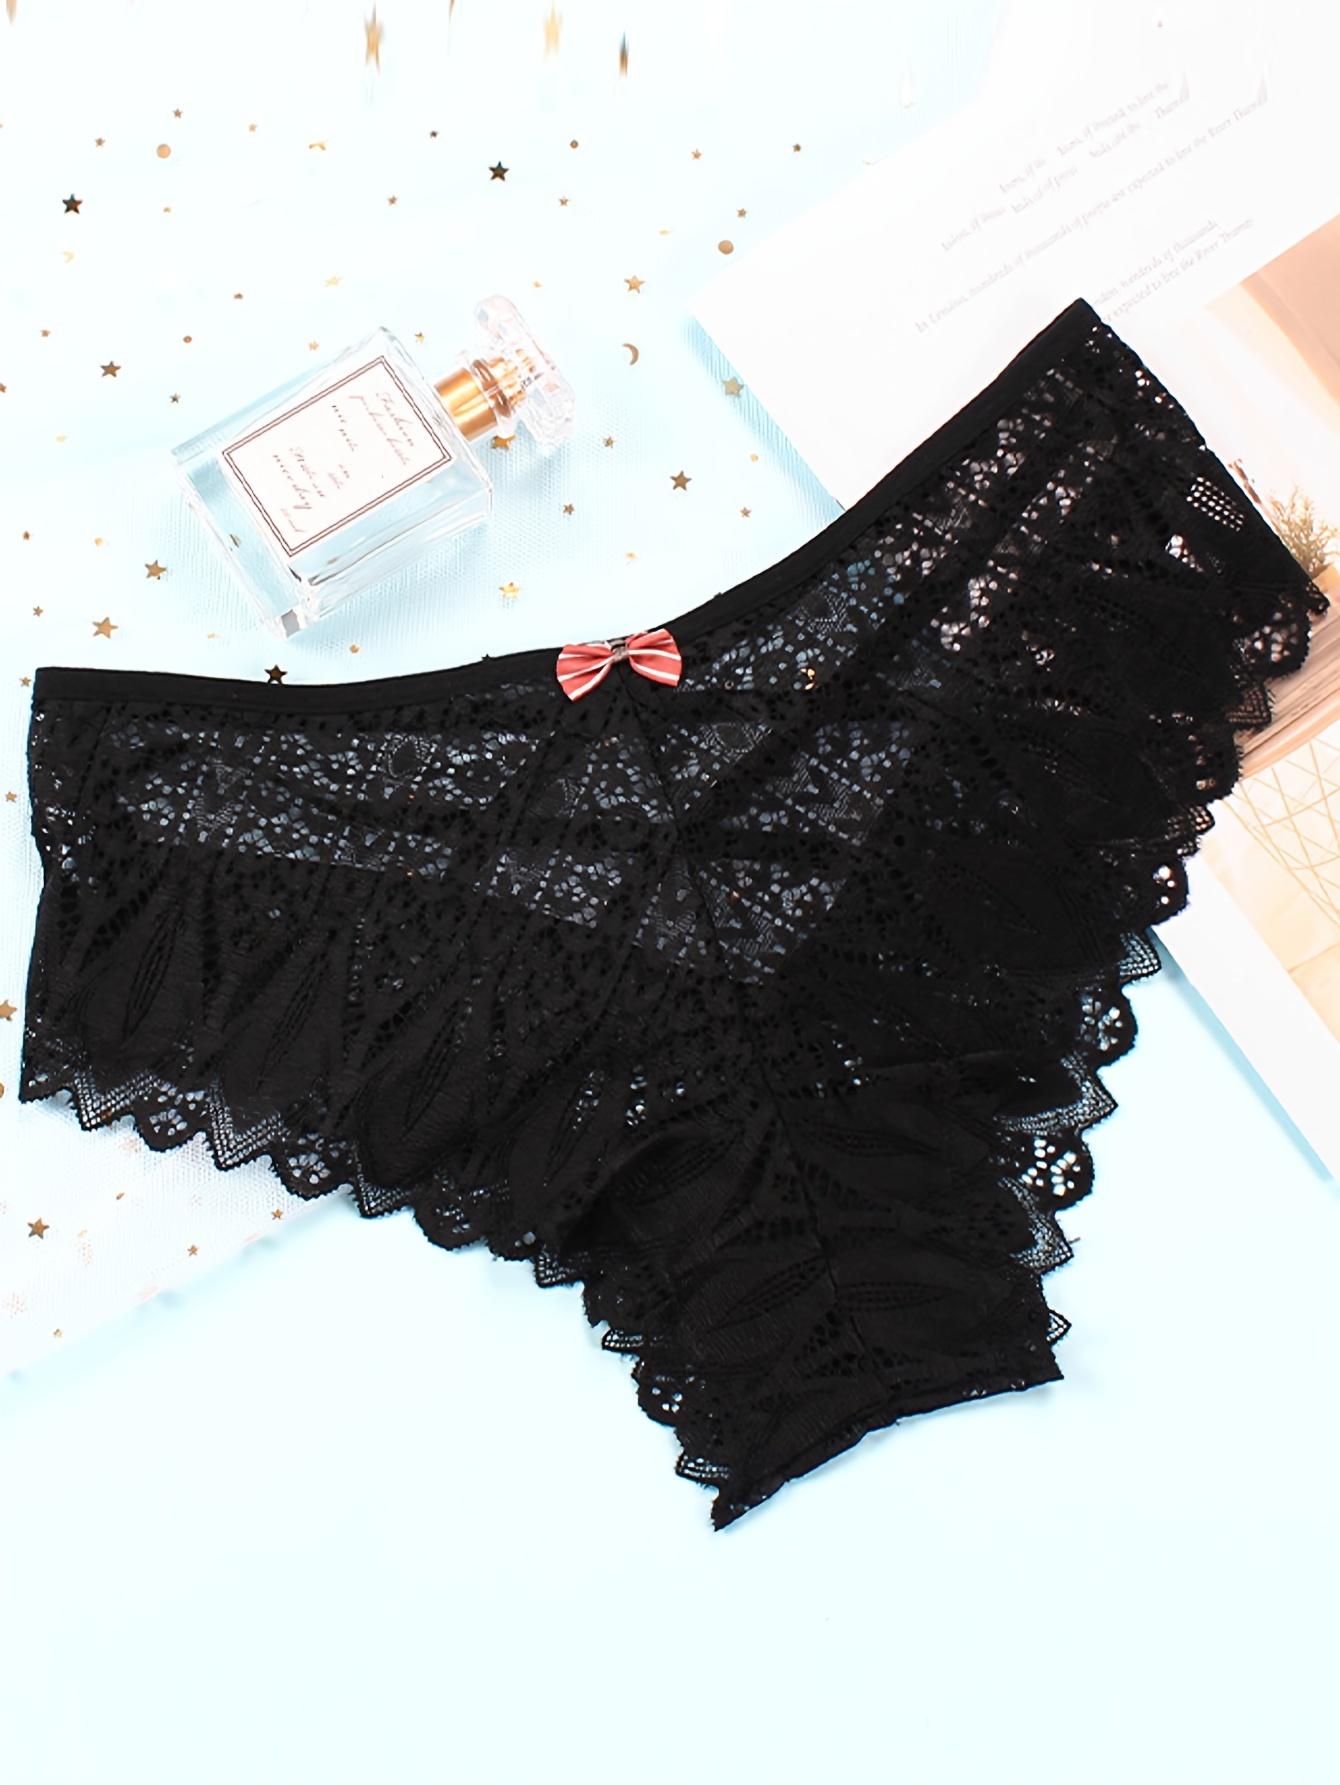 Women's Cross Open Front and Back Hipster Panties H112 –